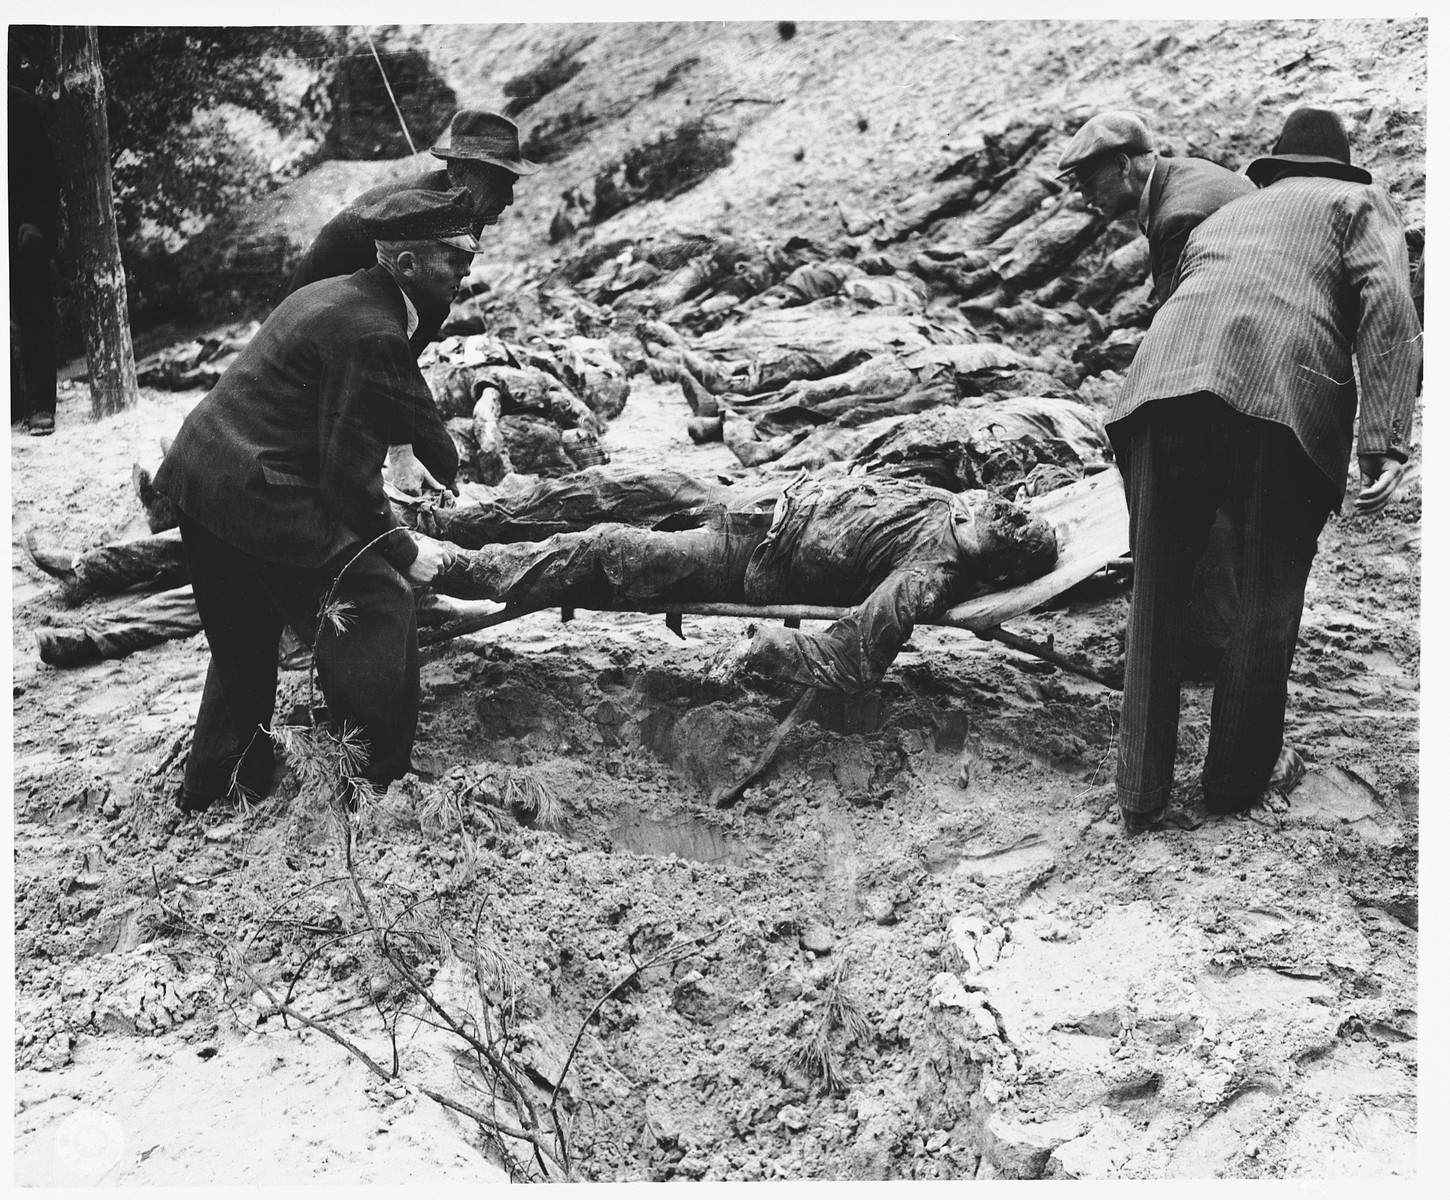 Under the supervision of American soldiers, German civilians exhume the bodies of 71 political prisoners from a mass grave on Wenzelnberg near Solingen-Ohligs.  

The victims, most of whom were taken from Luettringhausen prison, were shot and buried by the Gestapo following orders to eliminate all Reich enemies just before the end of the war.